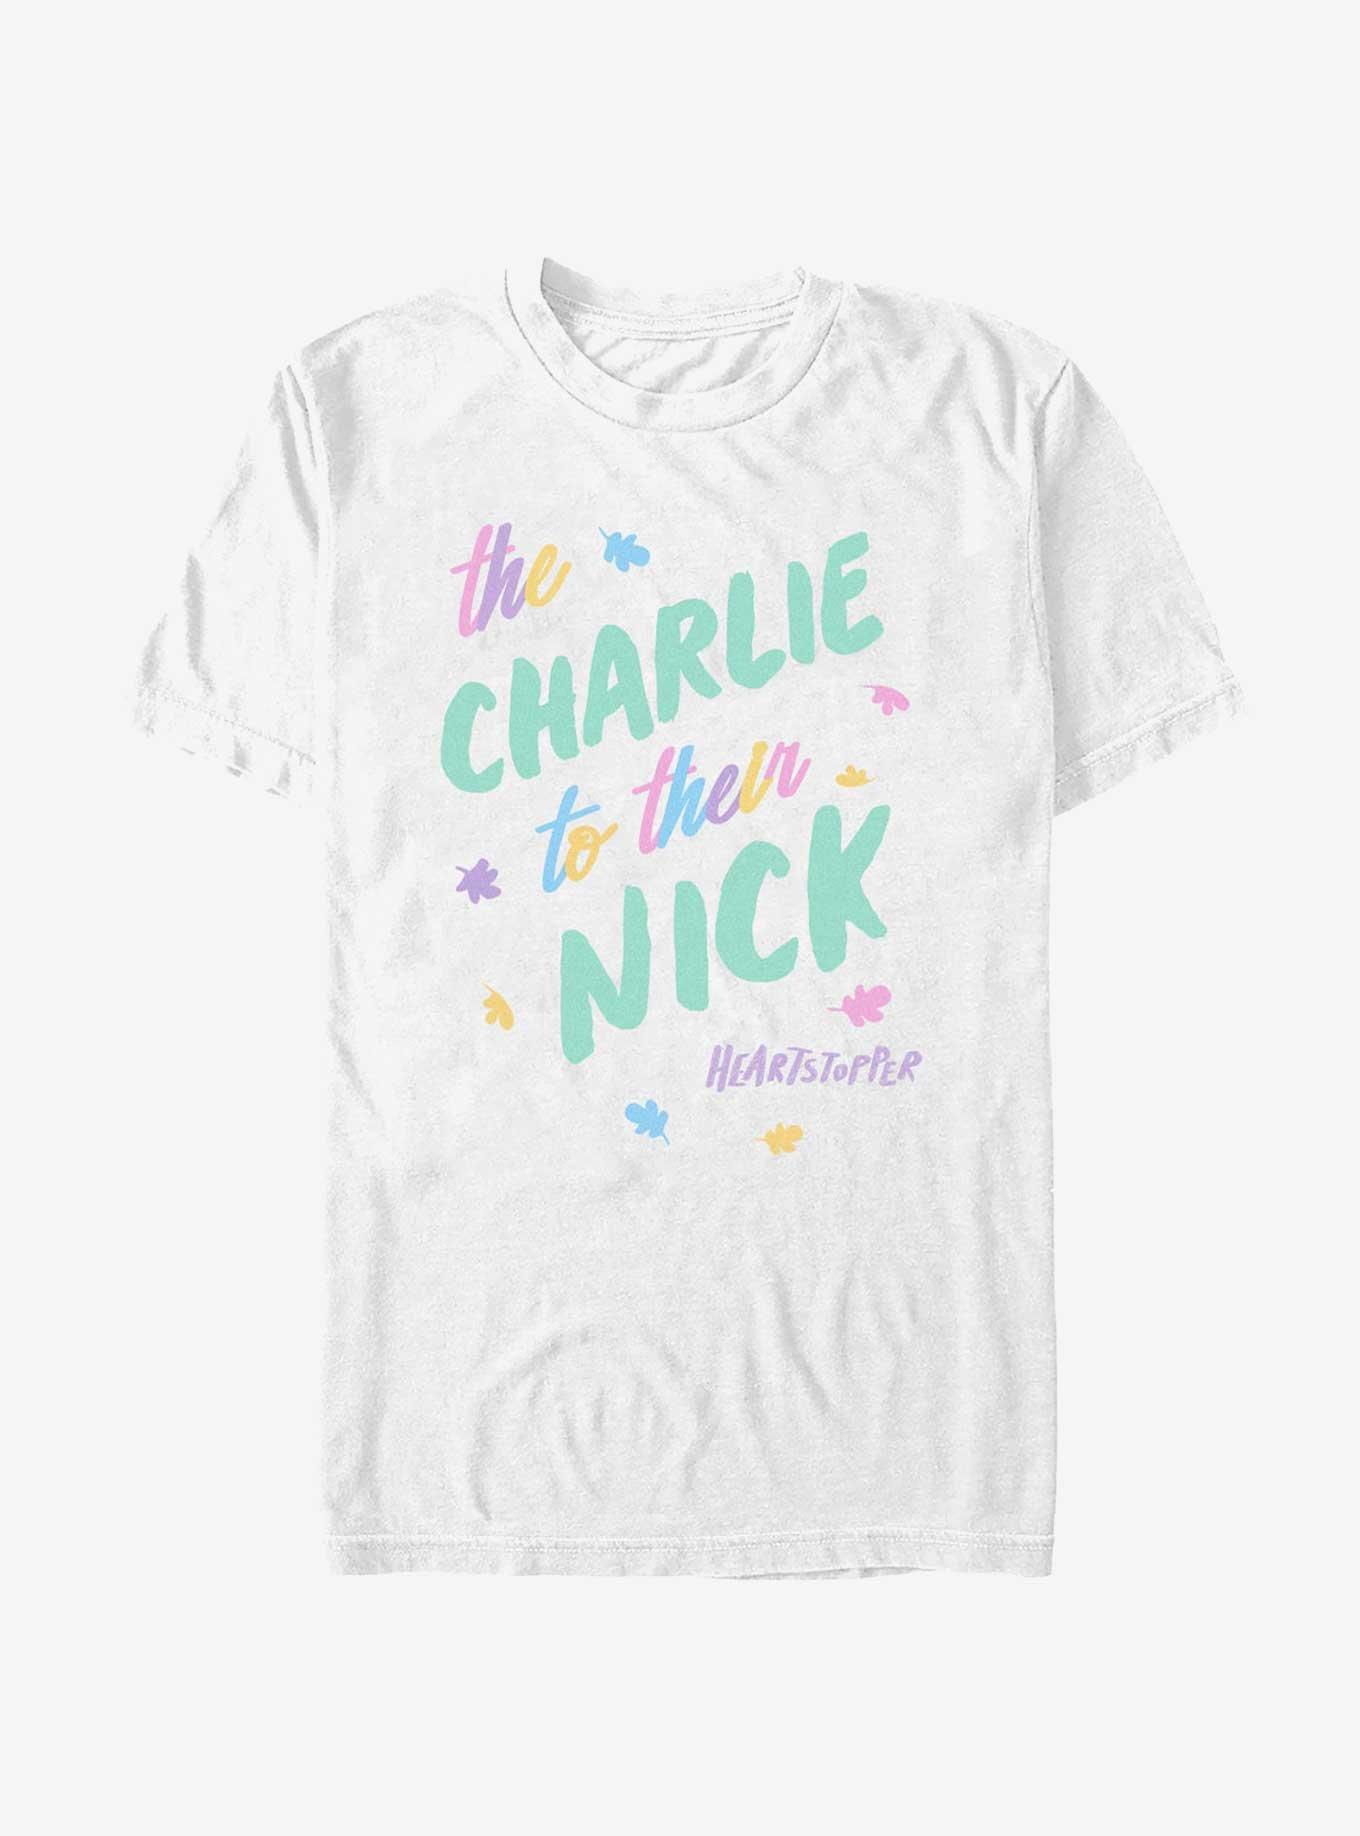 Heartstopper Charlie To Nick Pride T-Shirt, WHITE, hi-res